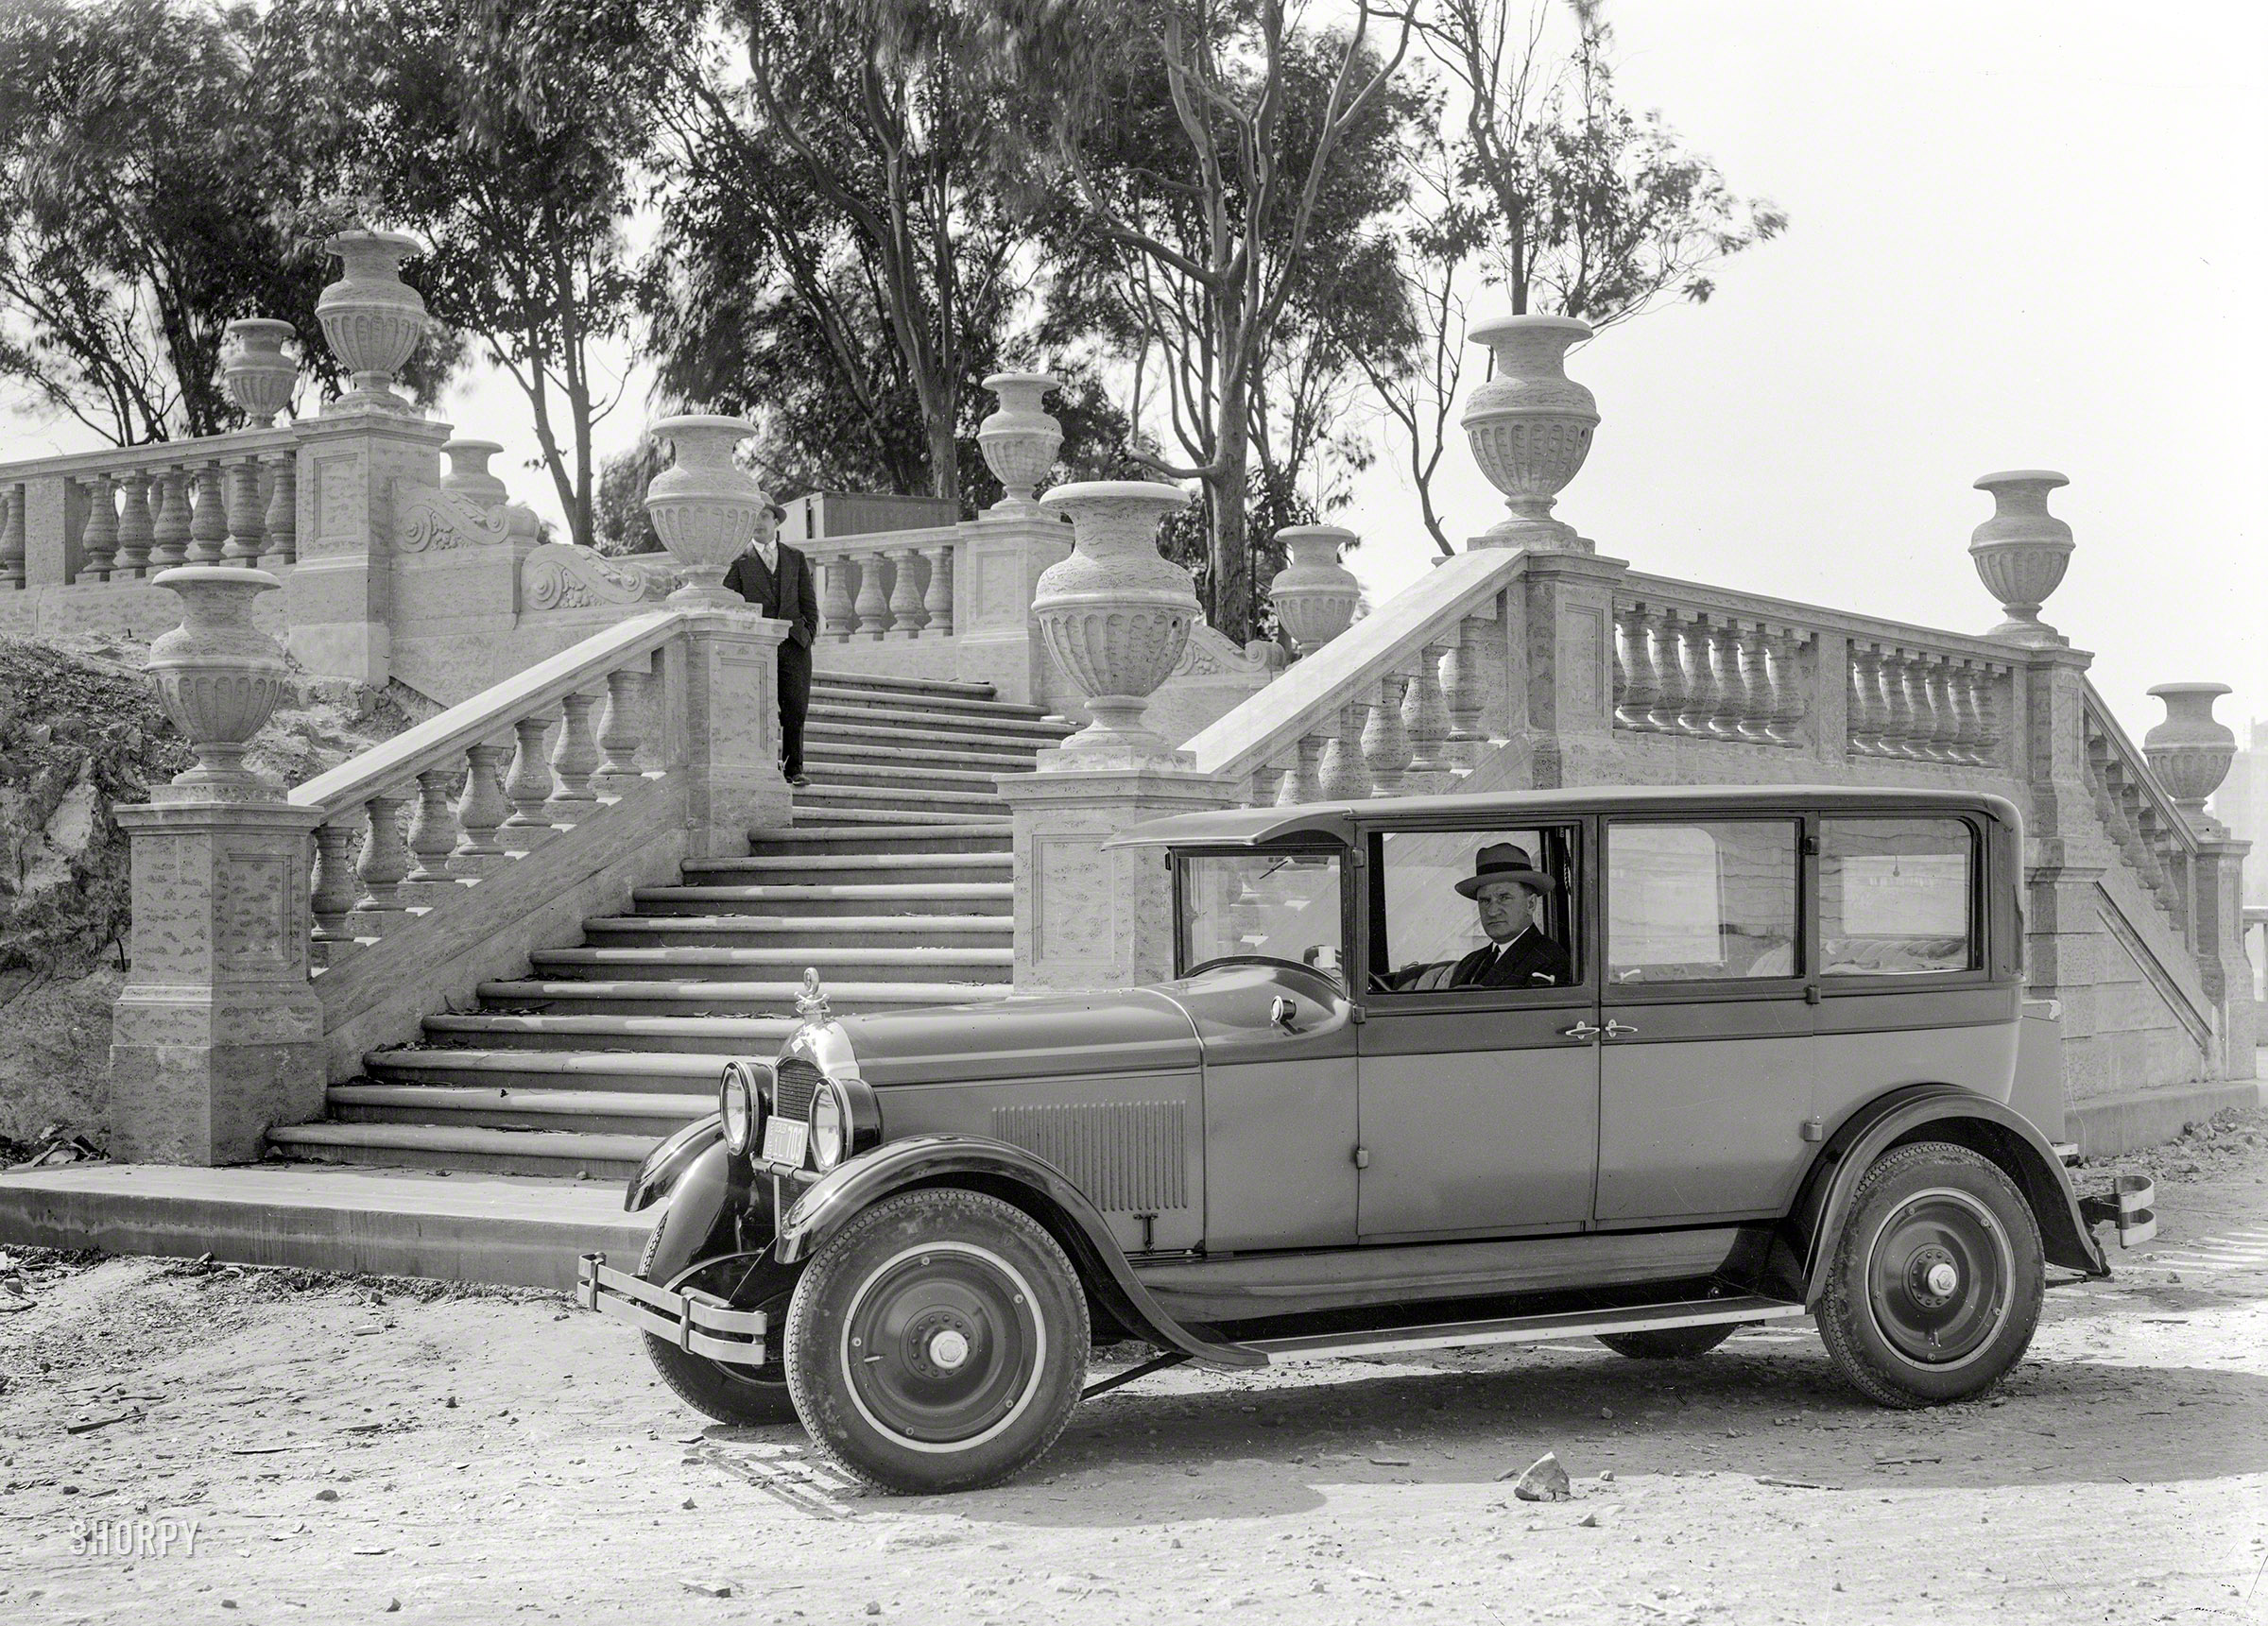 San Francisco, 1926. "Paige sedan (Series 2) at Pioneer Park, Telegraph Hill." 5x7 glass negative by Christopher Helin. View full size.